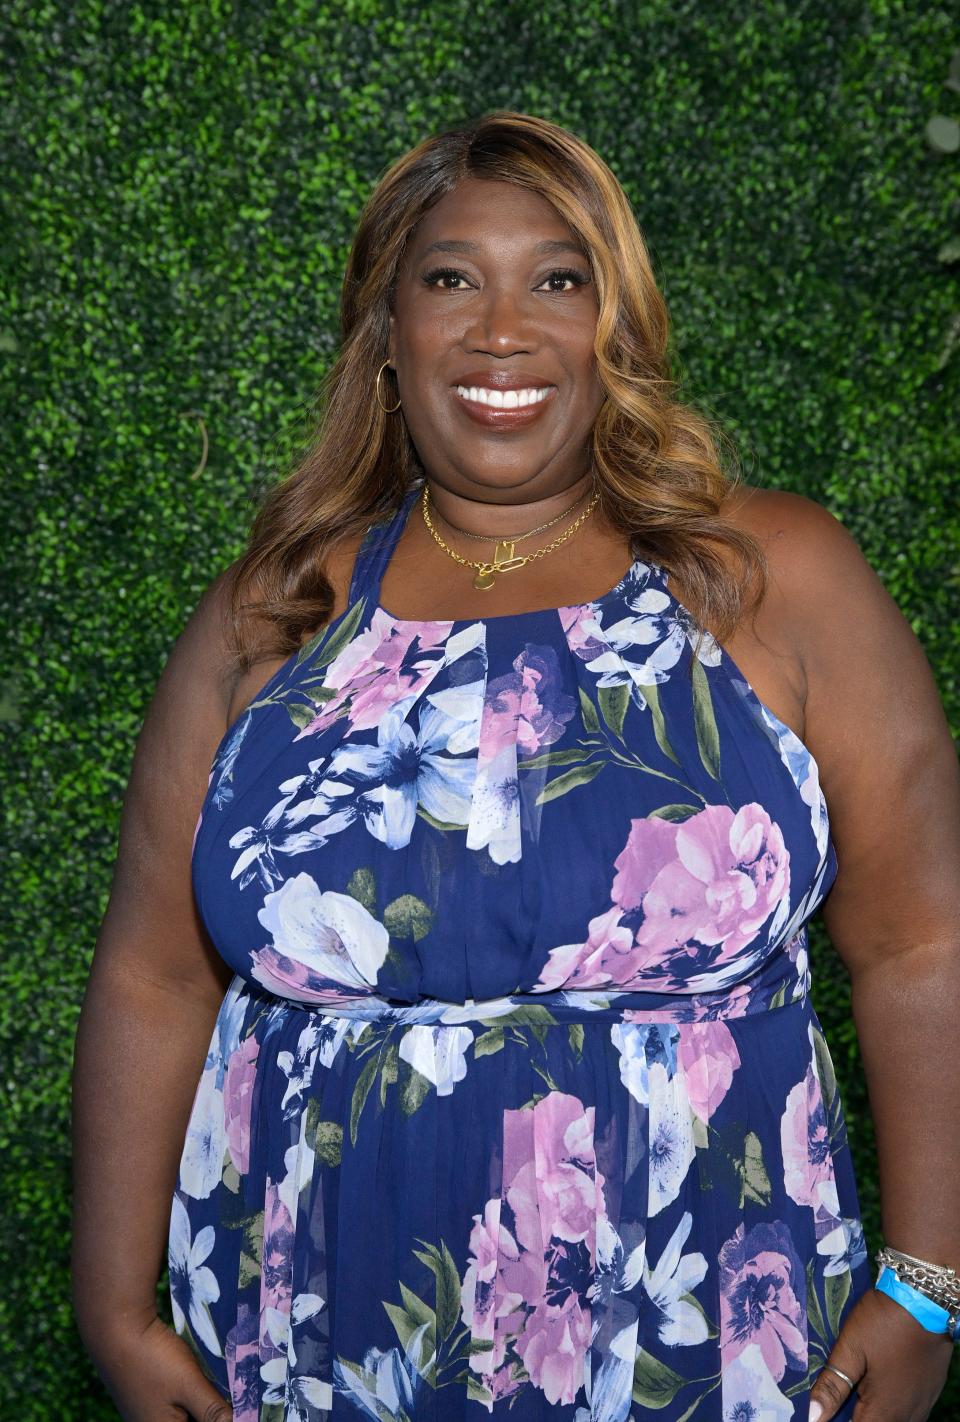 Hallmark Media Family Networks SVP of Programming Development Toni Judkins attends a special screening of Hallmark's "Unthinkably Good Things" at The Athenaeum on August 10, 2022 in Pasadena, California.